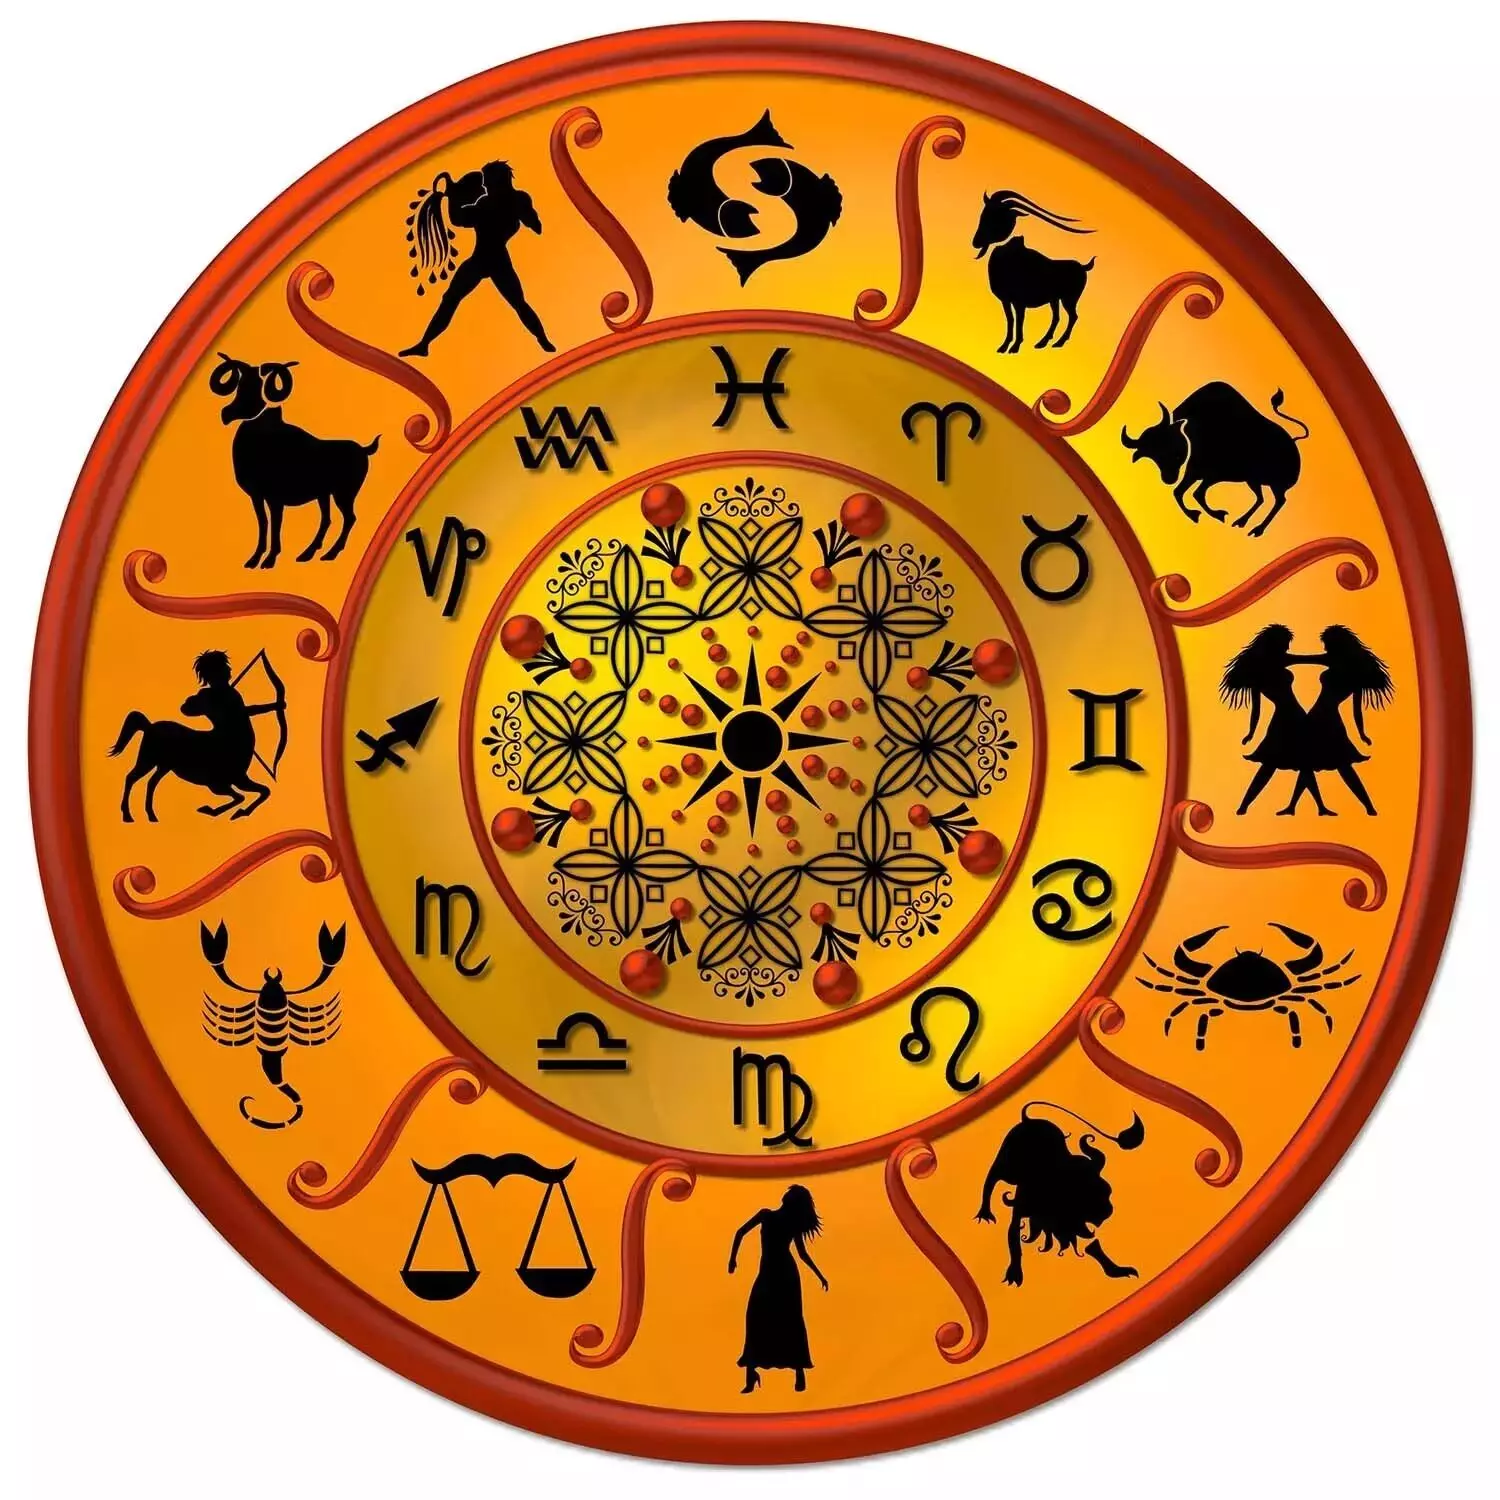 30 April – Know your todays horoscope